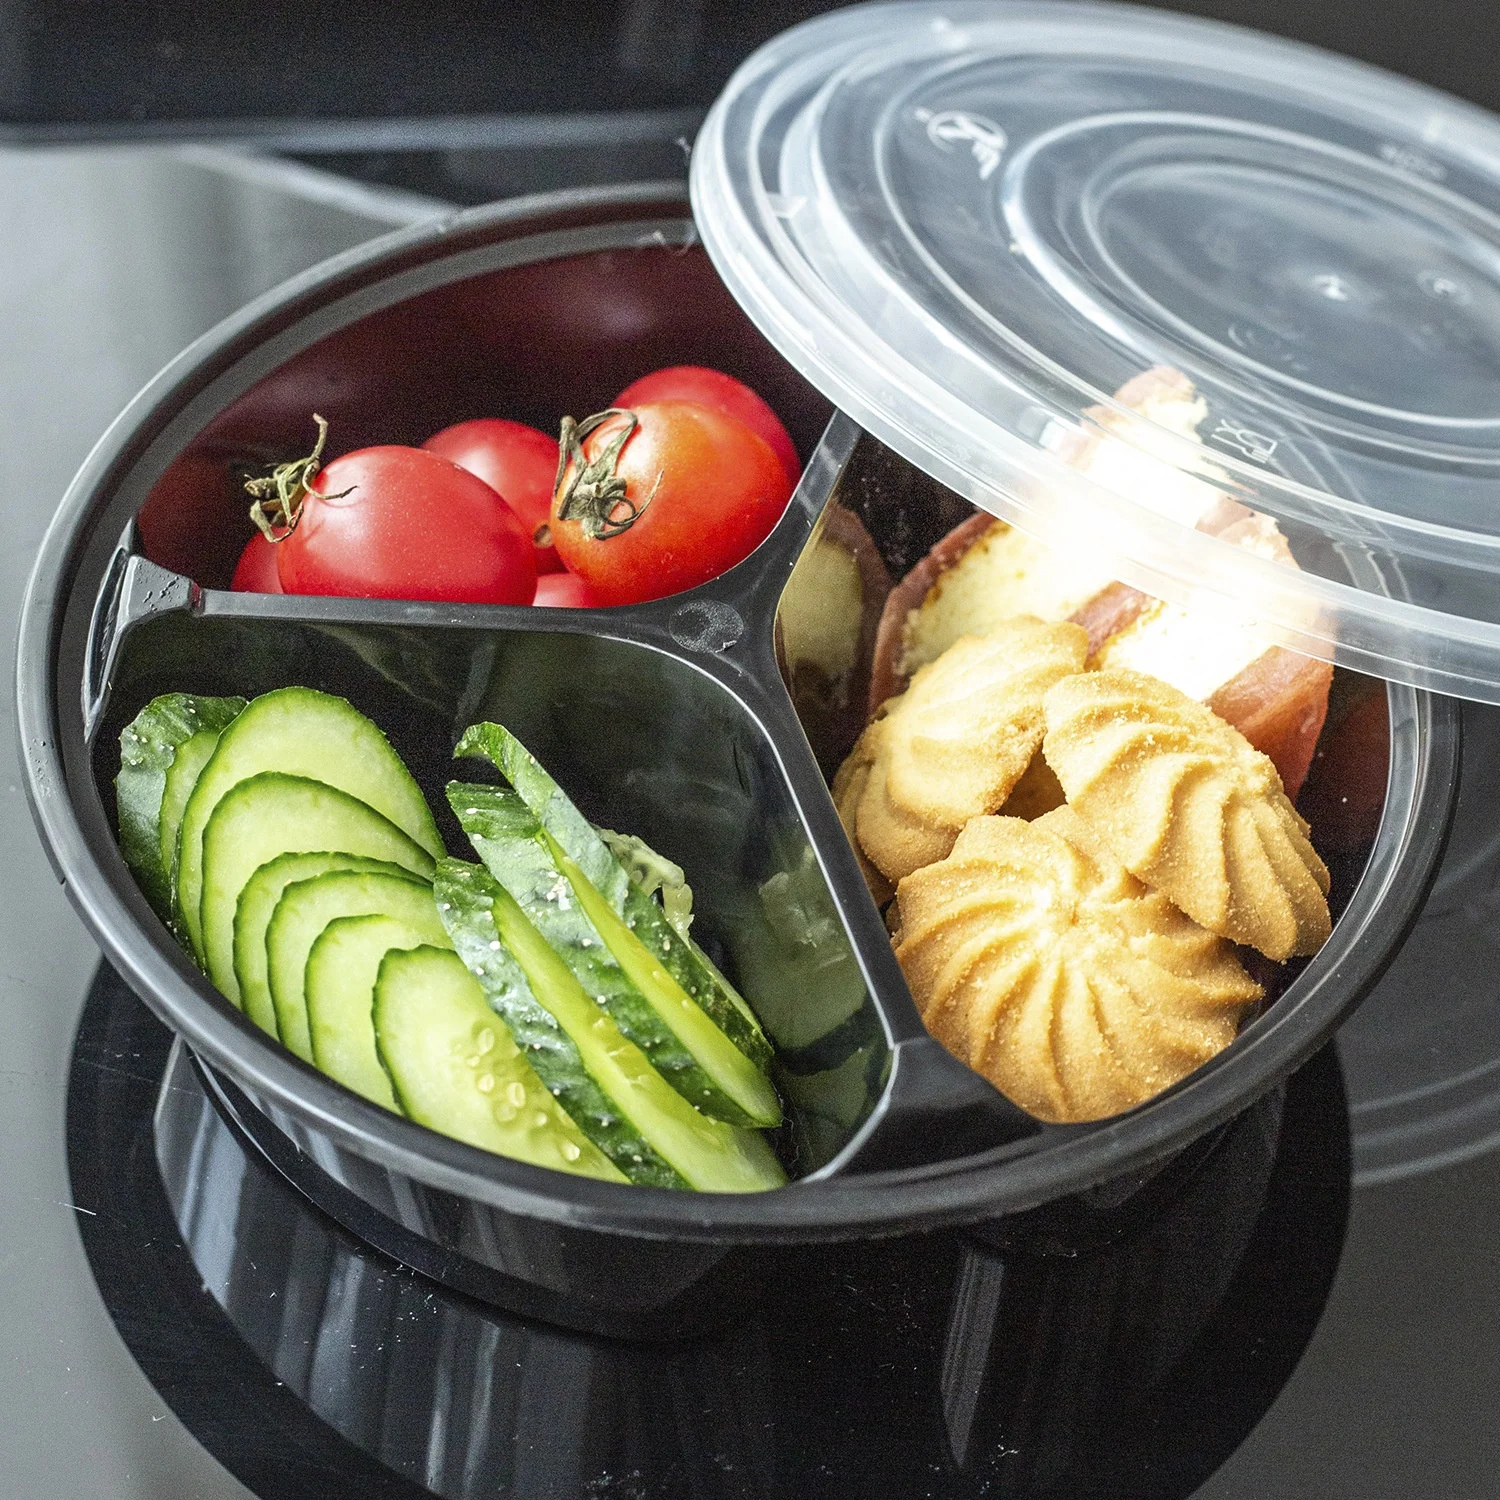 FastPac Black Medium 2 Compartment Takeout Food Containers 9L x 6 1/2W x  2 7/8D